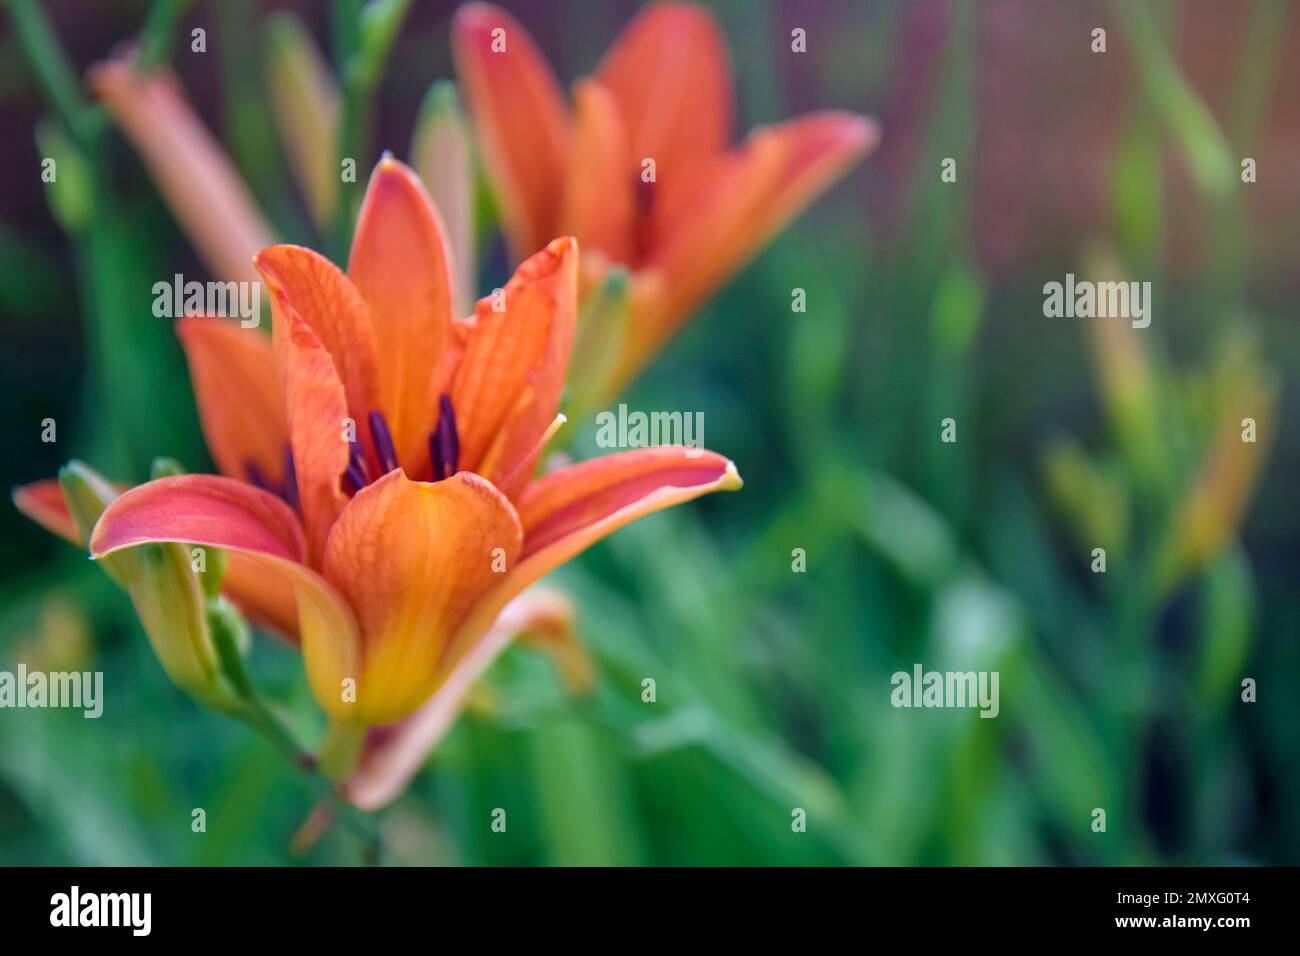 Blooming red lily (Lilium) in garden on blurry green background. Beautiful garden plant in flower bed. Close-up. Stock Photo